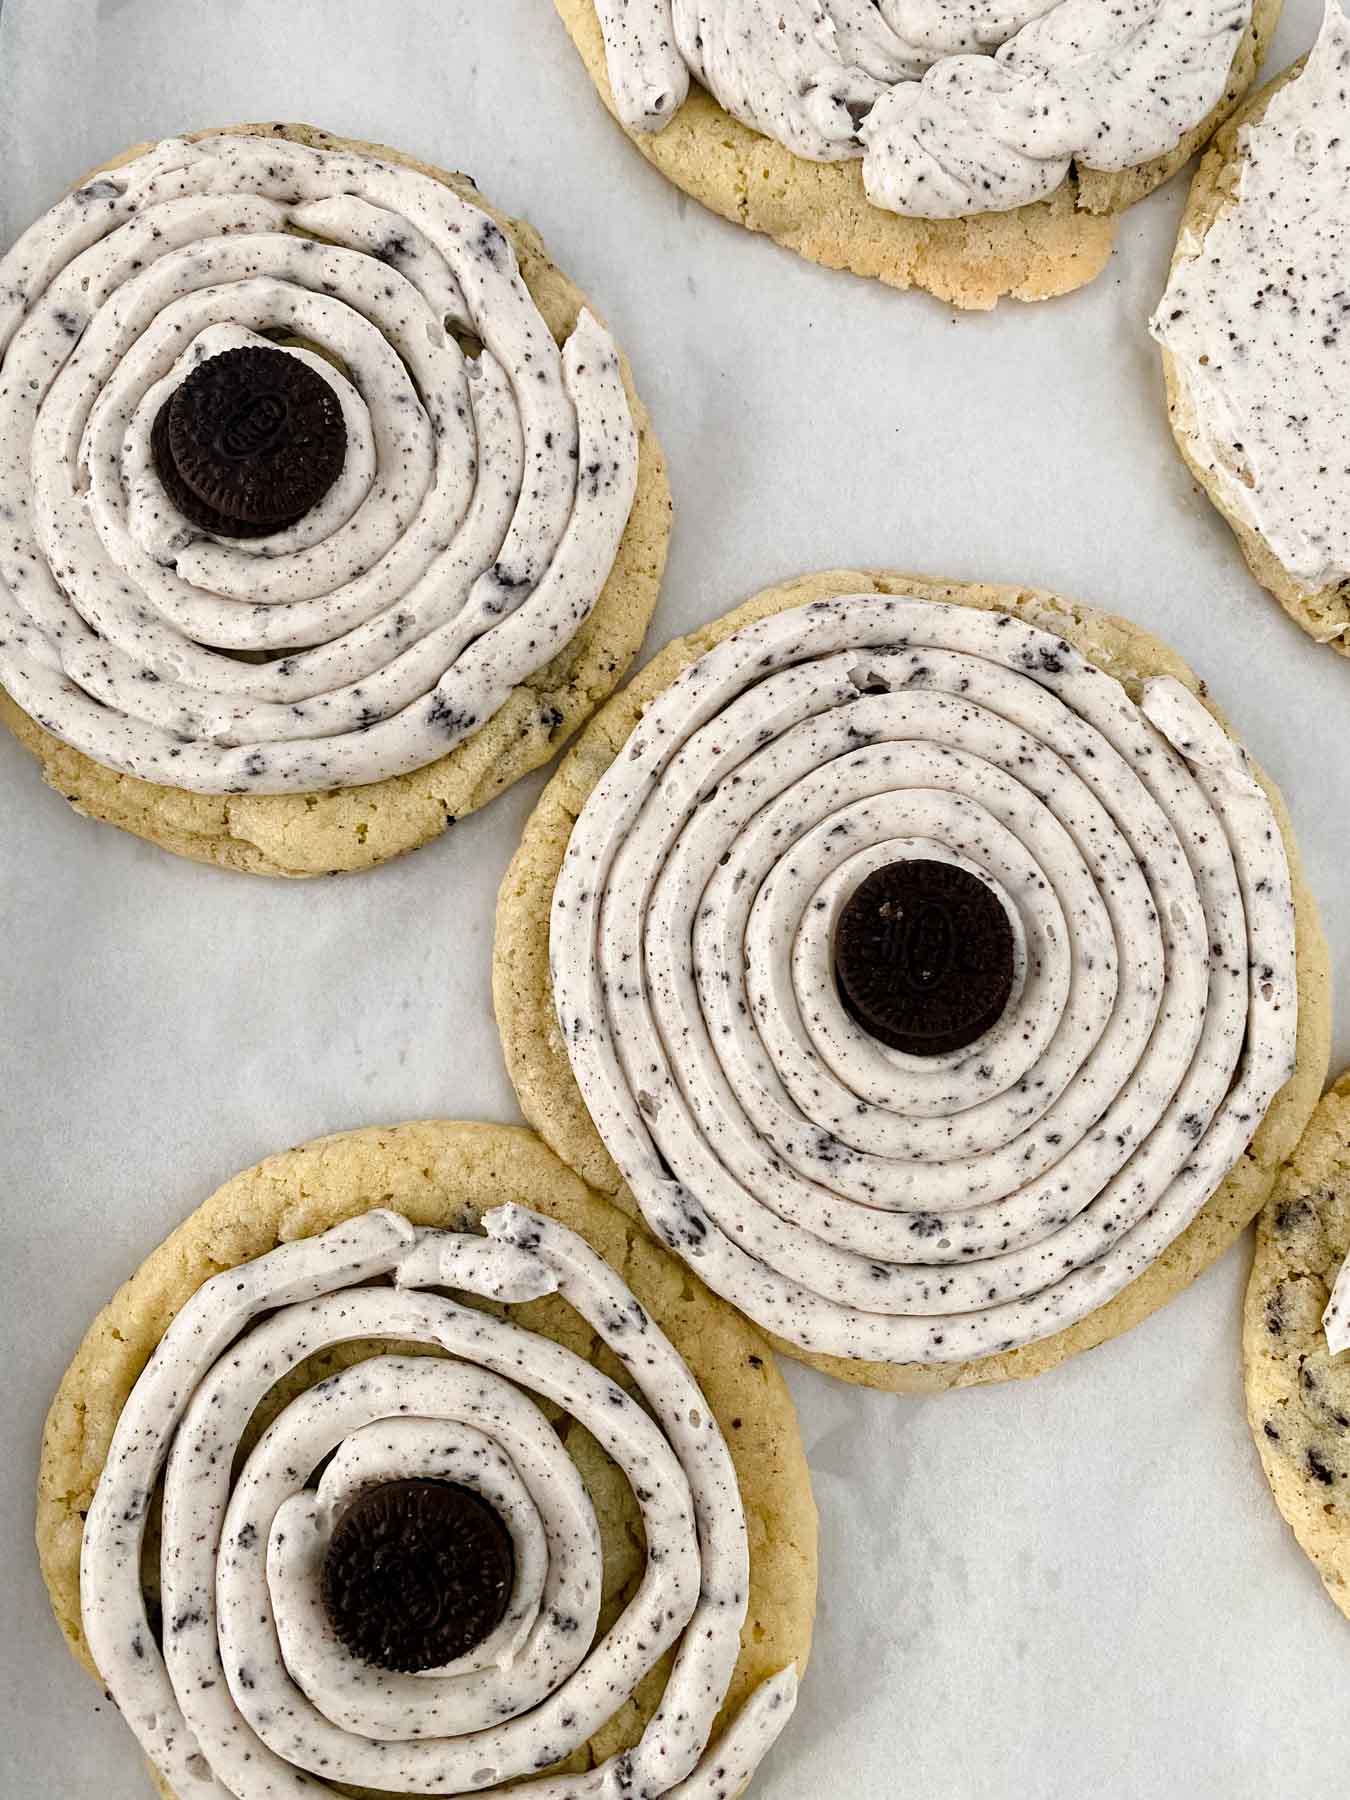 Top down view of baked and decorated Cookies and Cream cookies on parchment paper.